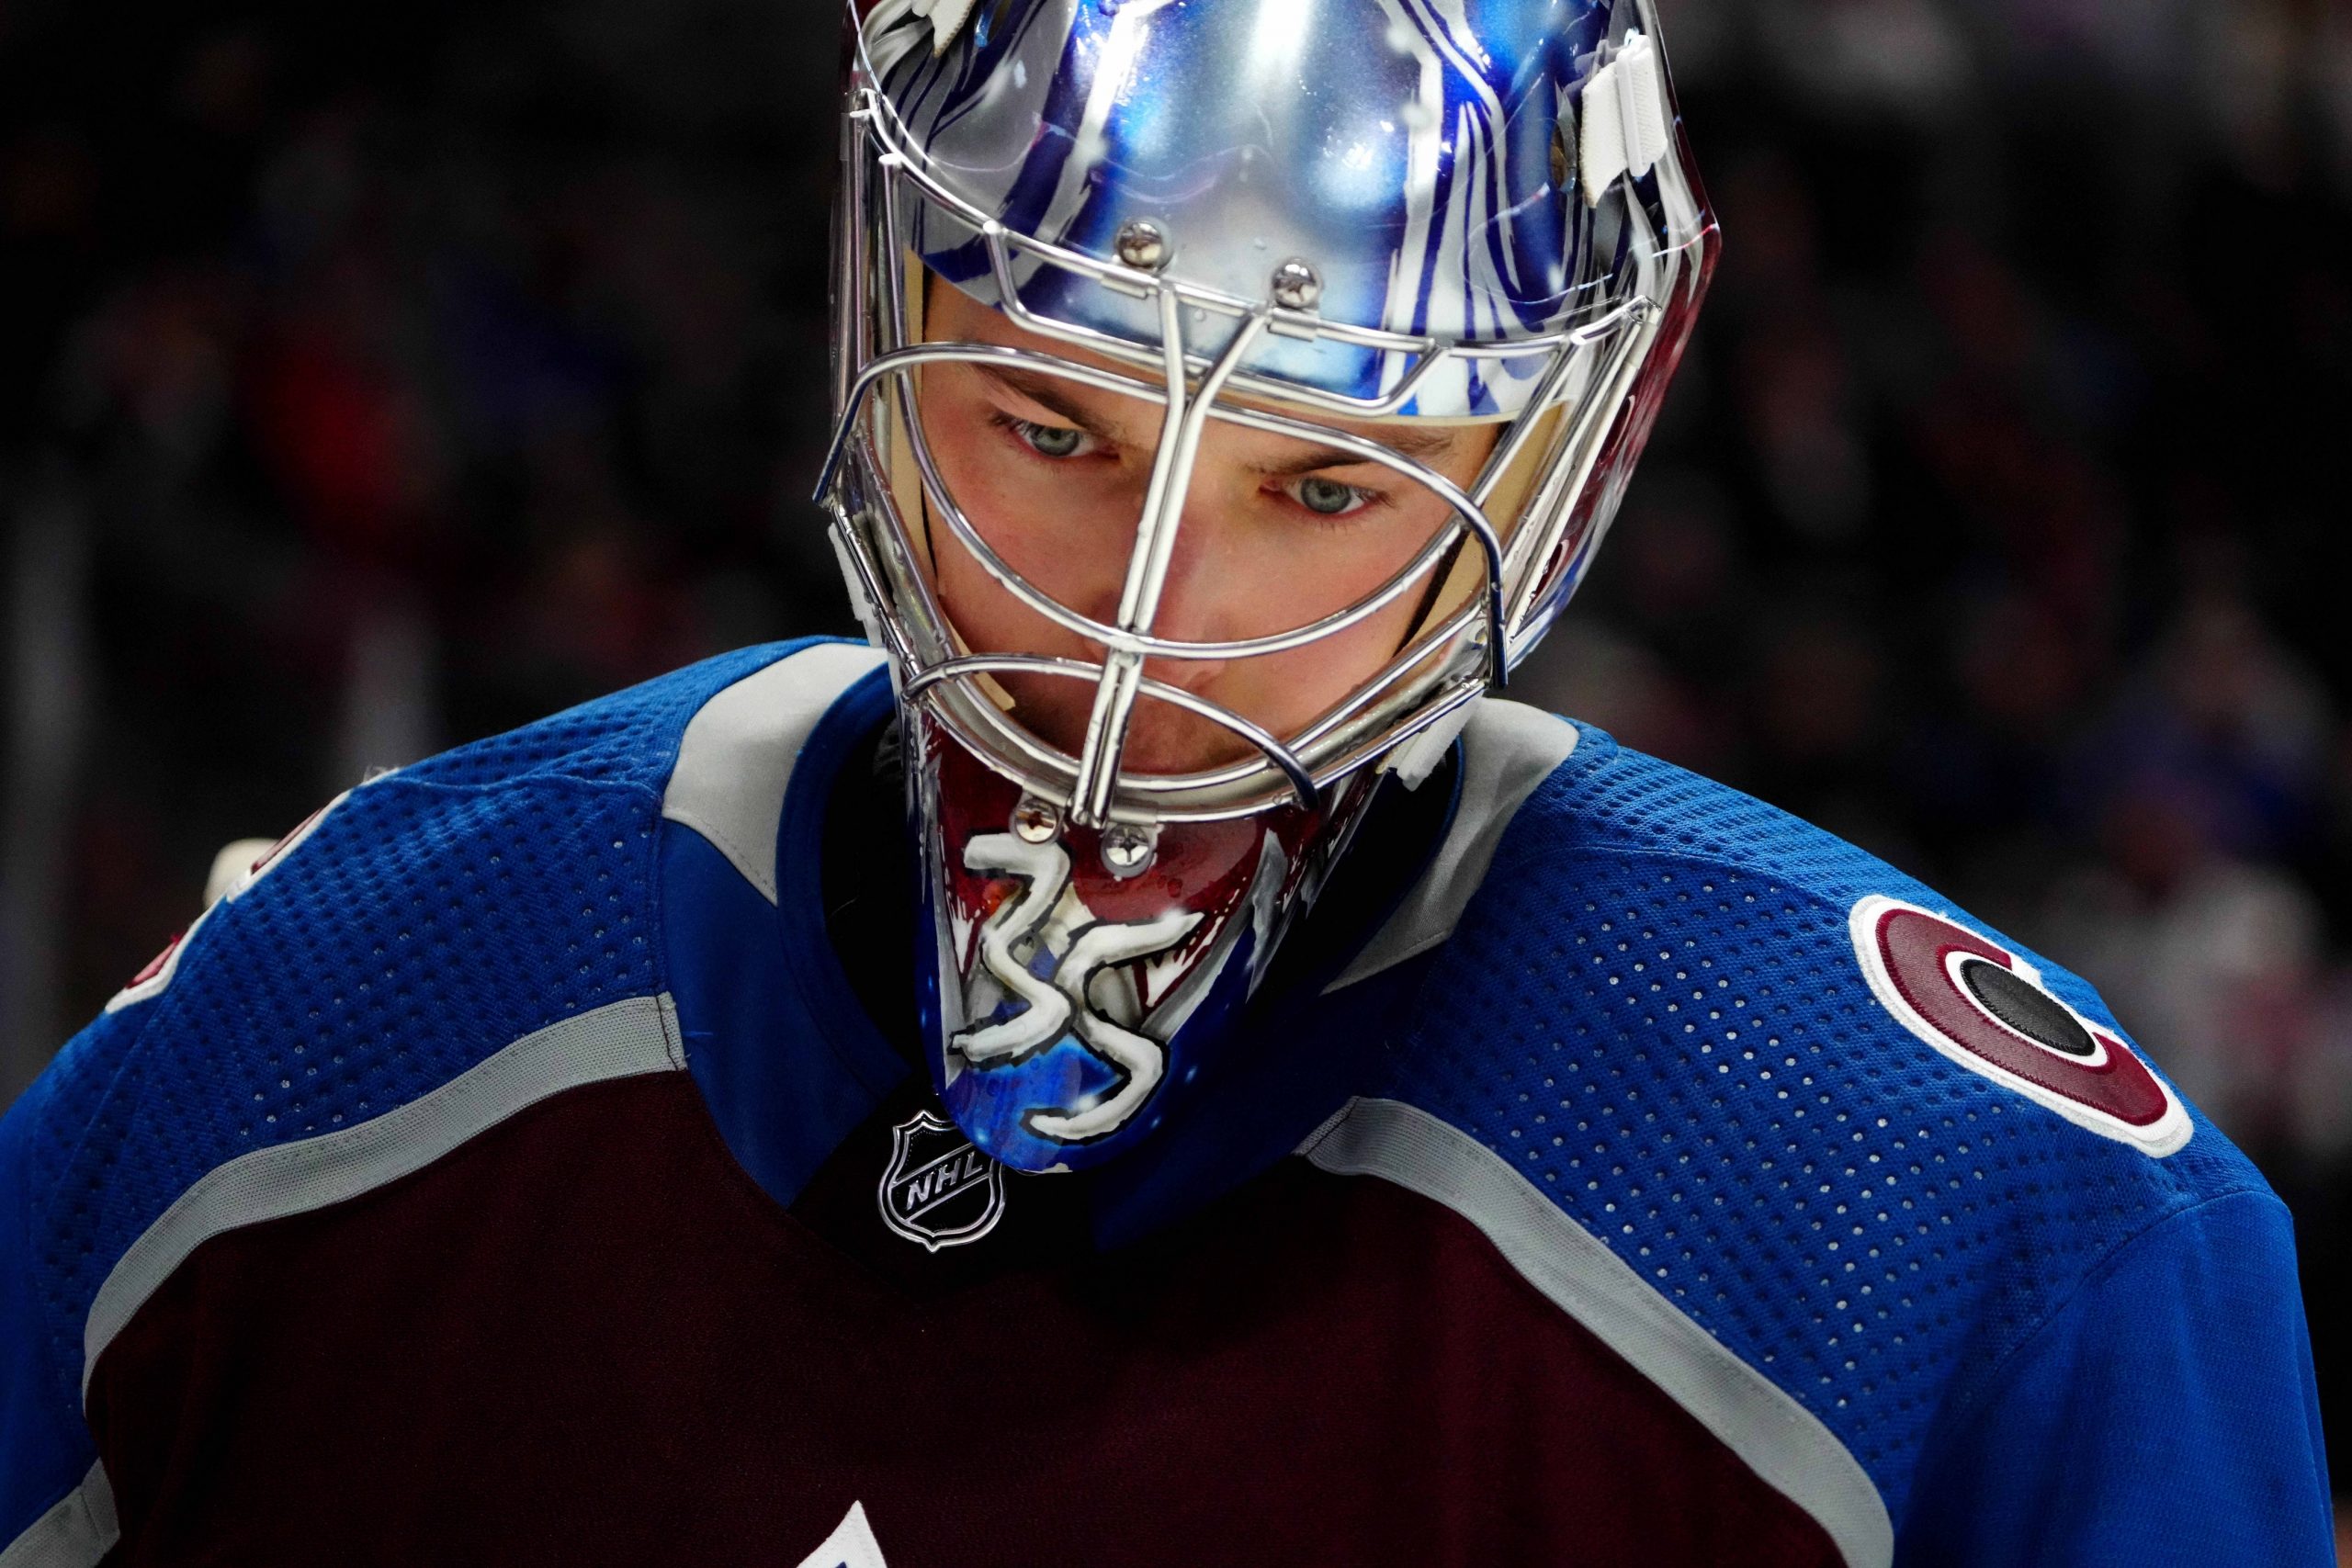 Avs goalie Darcy Kuemper leaves after taking stick to eye - WTOP News